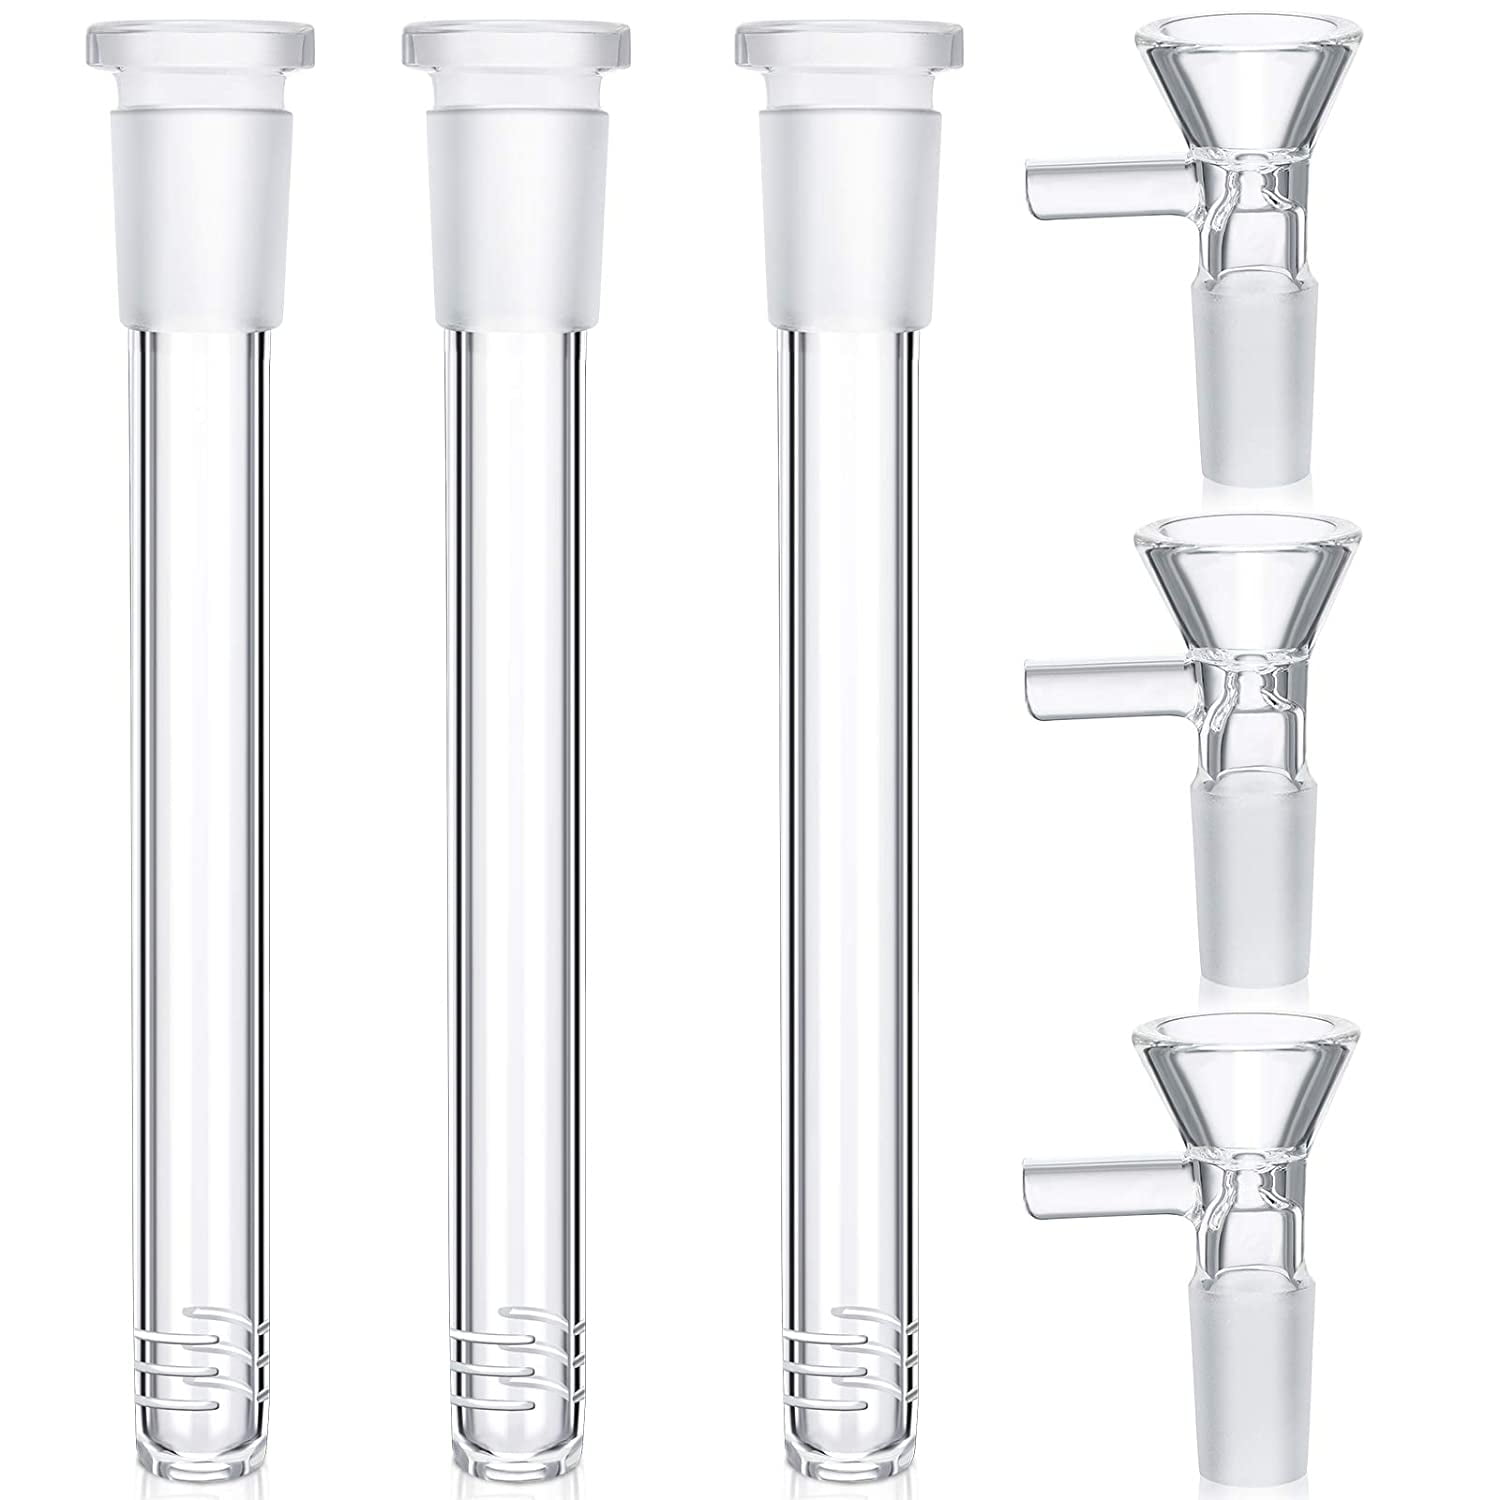 4 Pieces Stem Clear Scientific Glass Tube Adapter with 4 Pieces Glass Funnel for Science and Lab Experiments 2.8 Inches, 3.5 Inches, 4 Inches and 5.2 Inches 